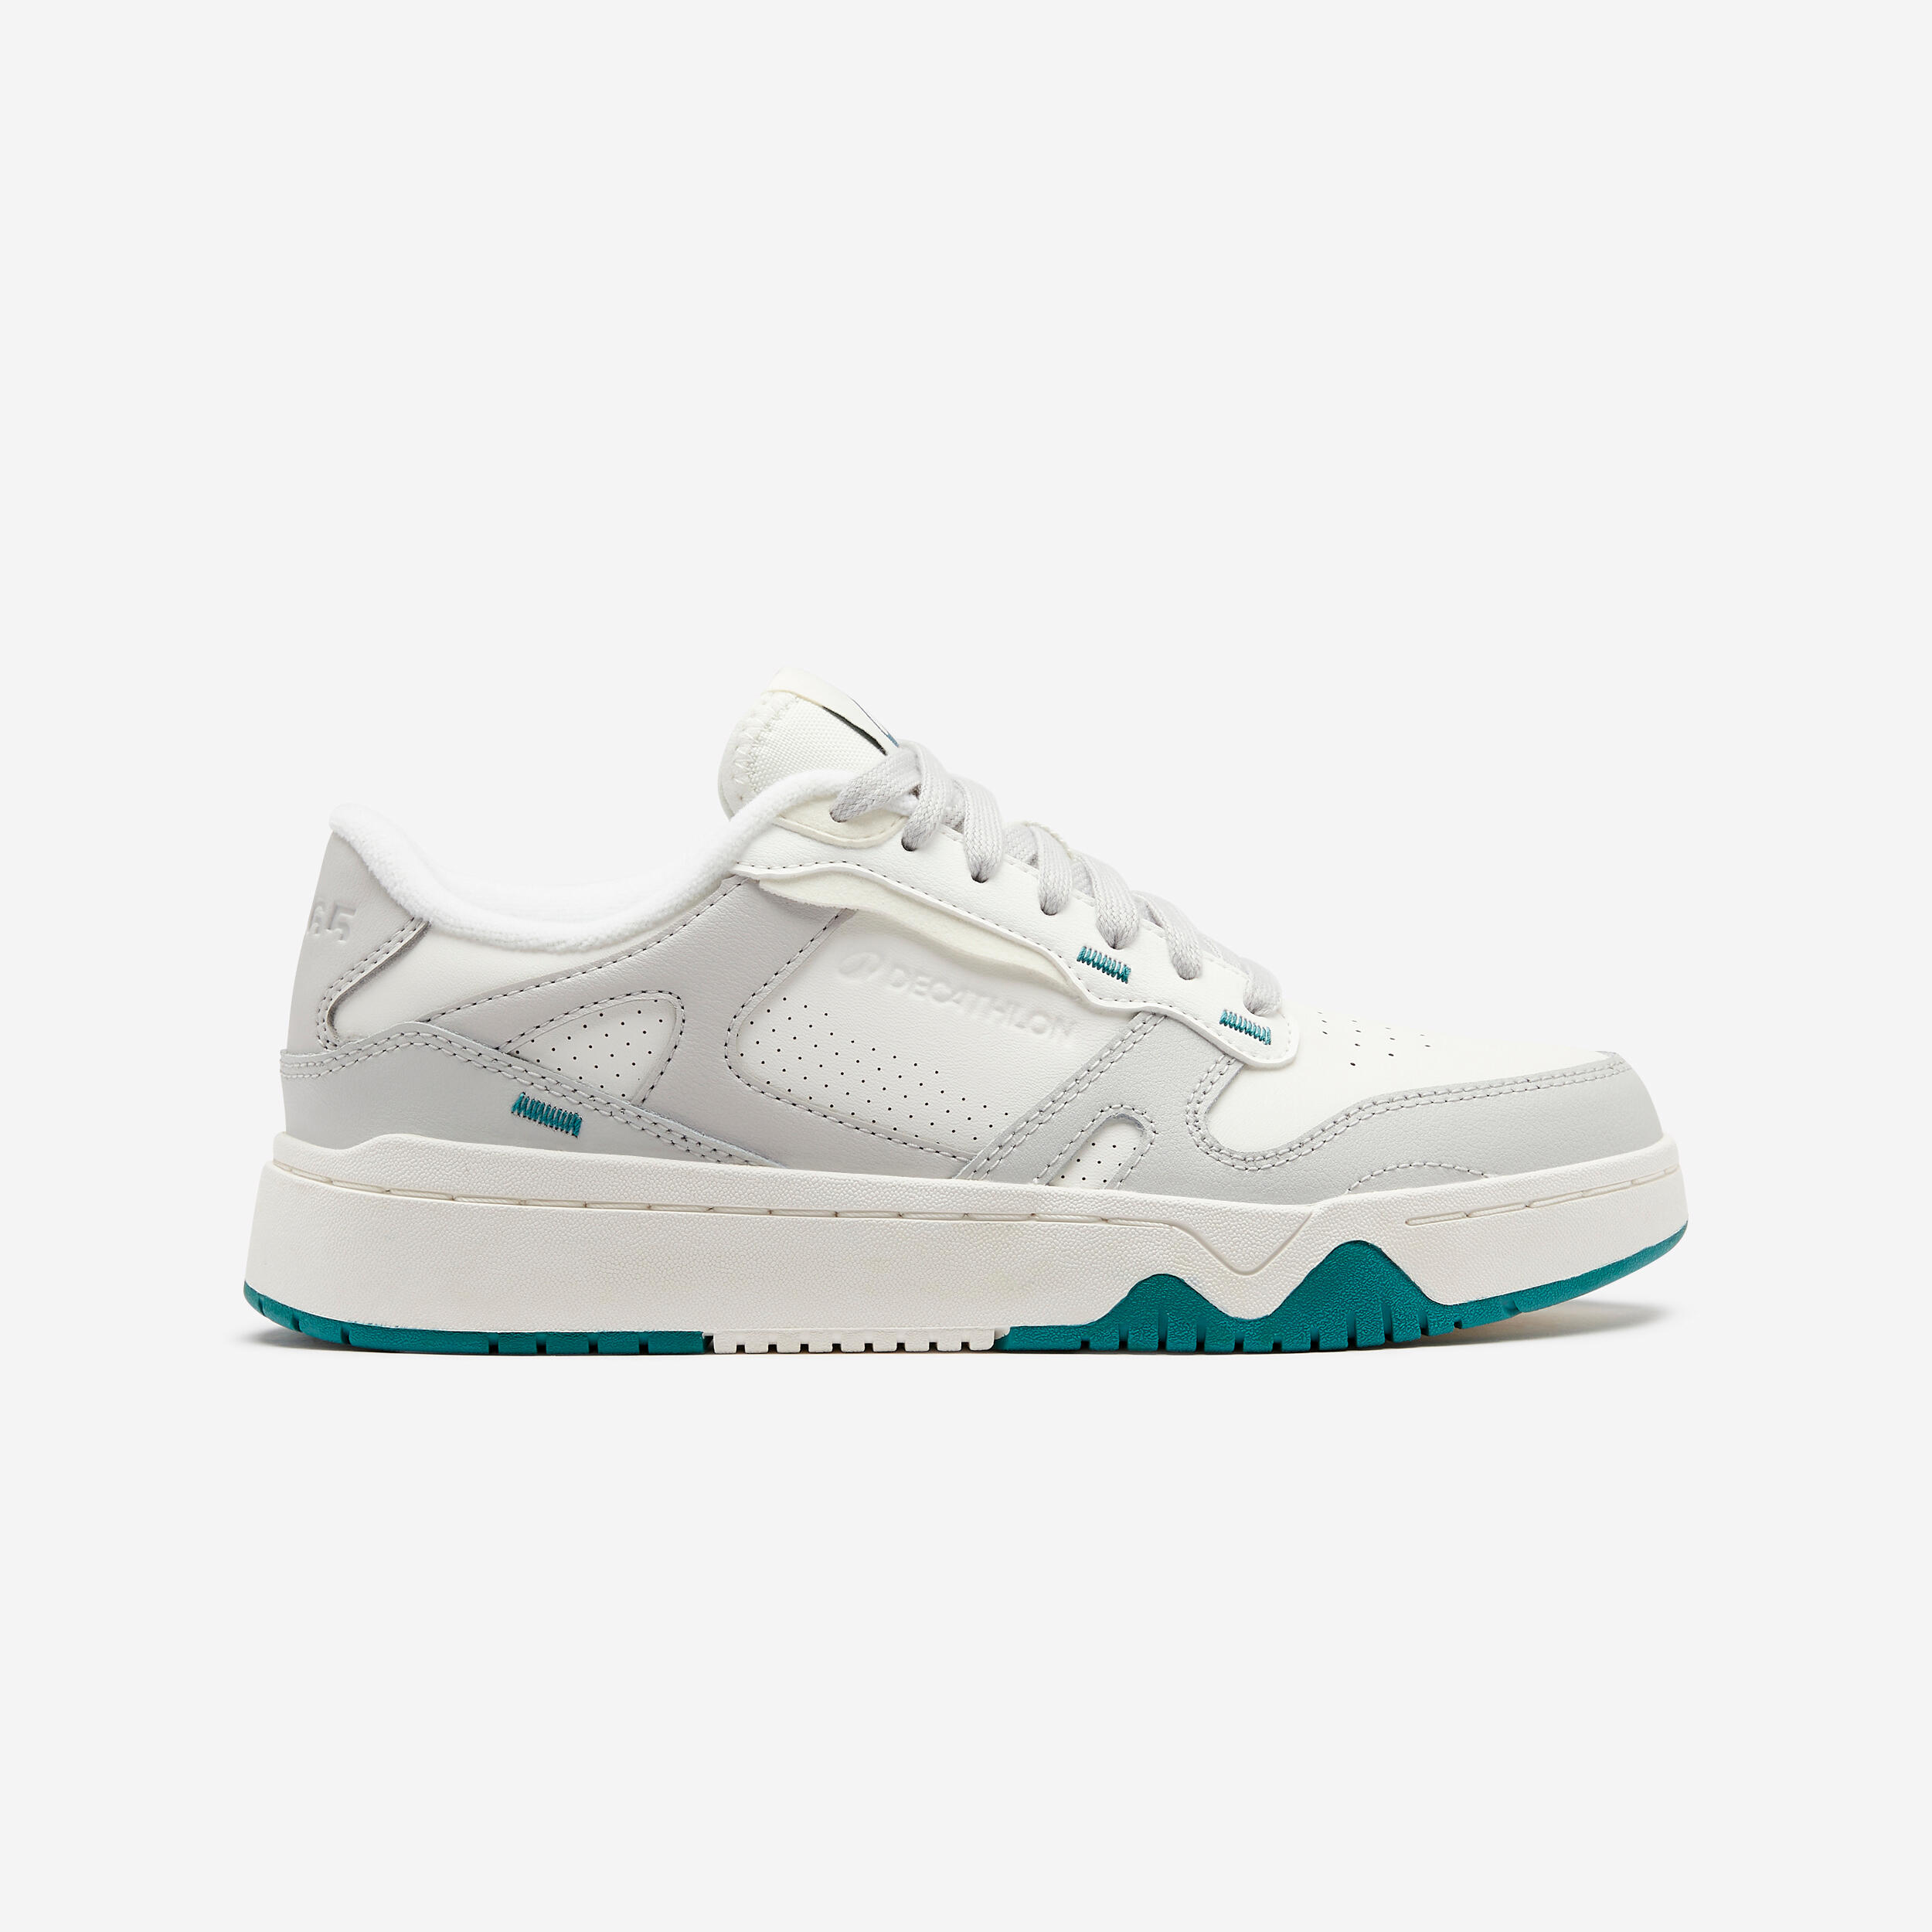 CJ80 Women's Trainers - White and grey 1/7